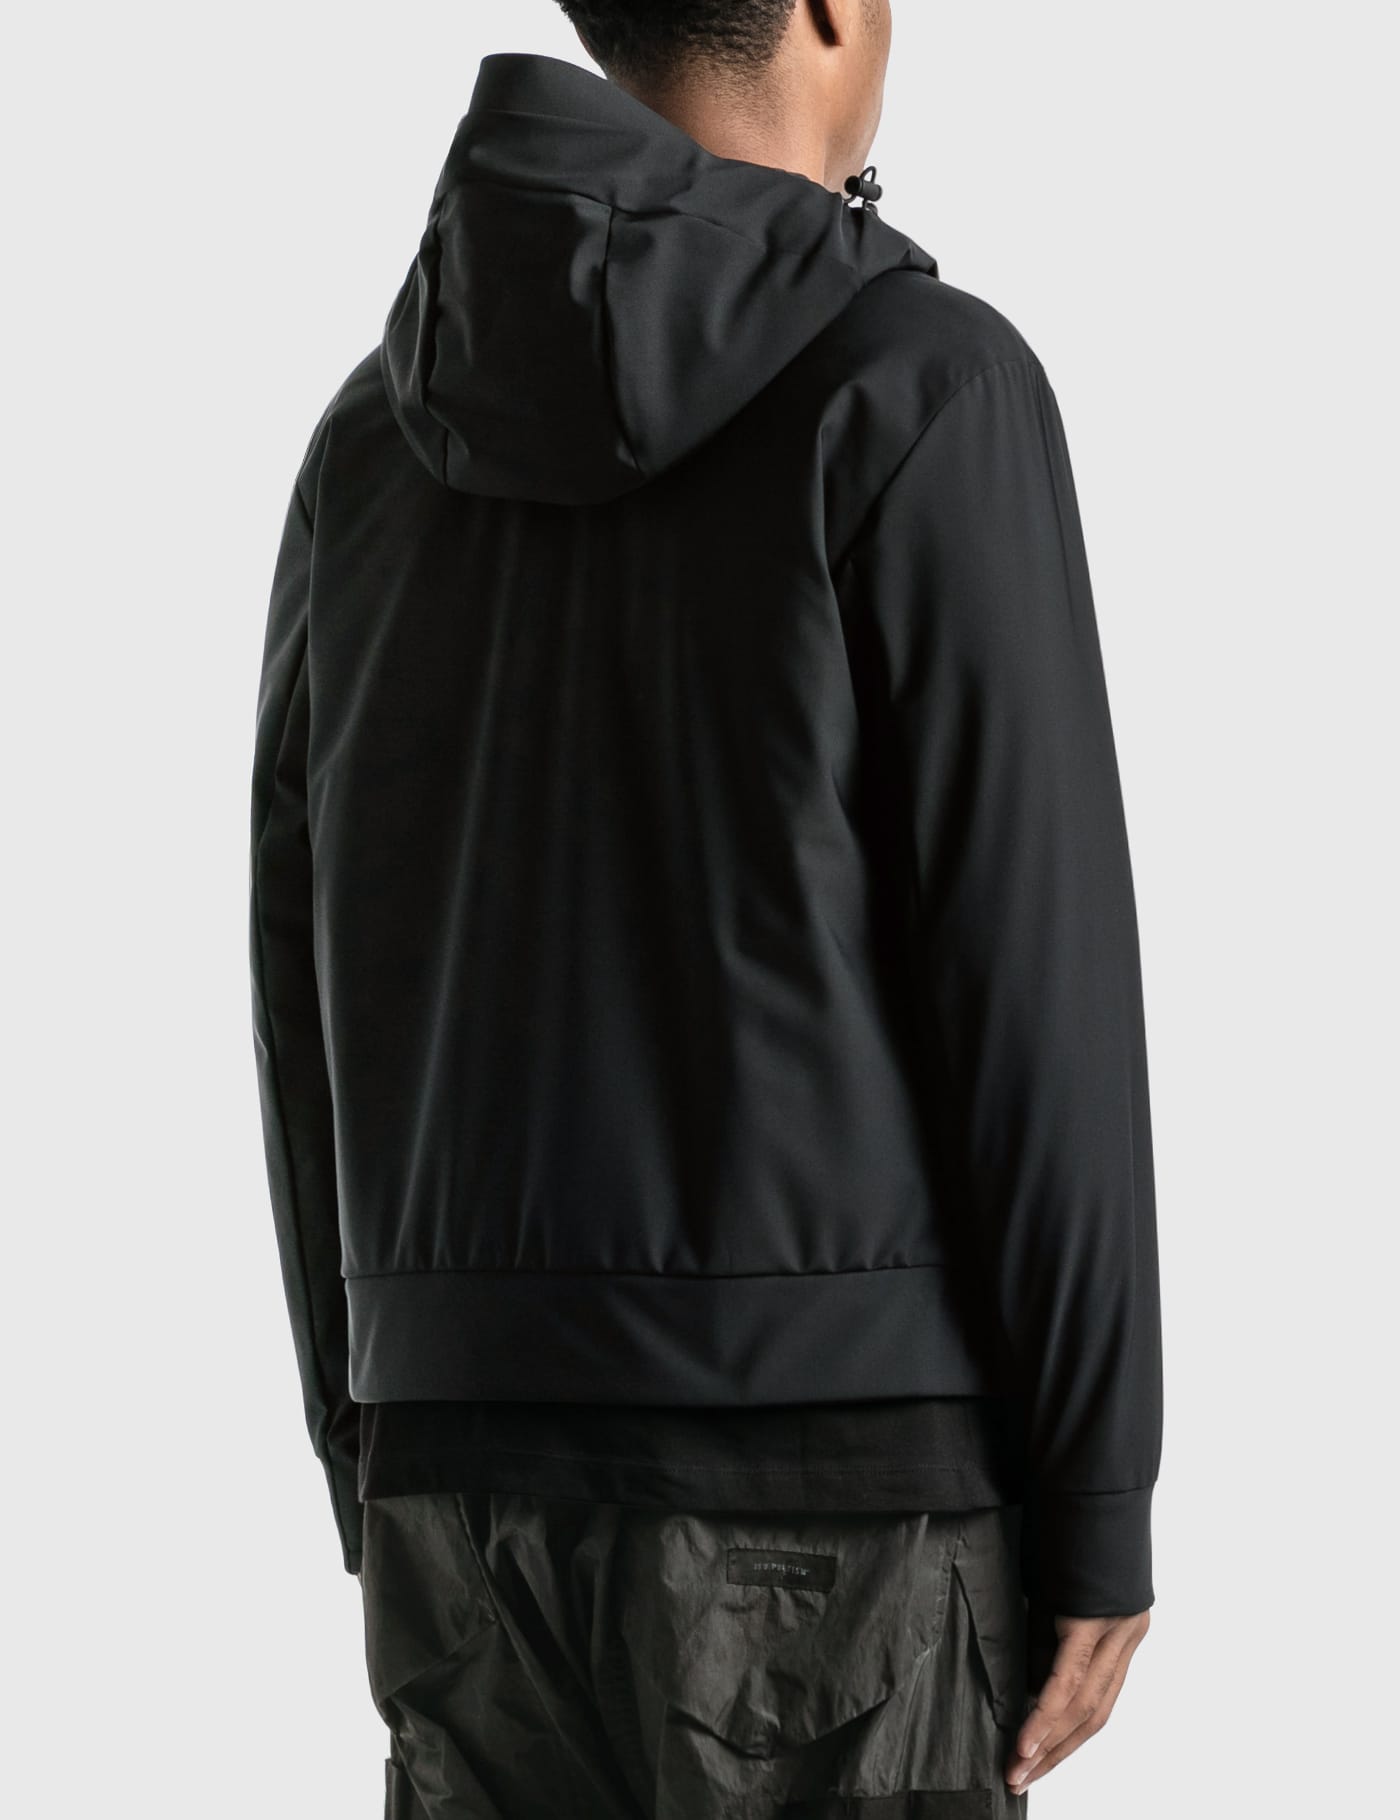 Moncler - Authion Jacket | HBX - Globally Curated Fashion and 